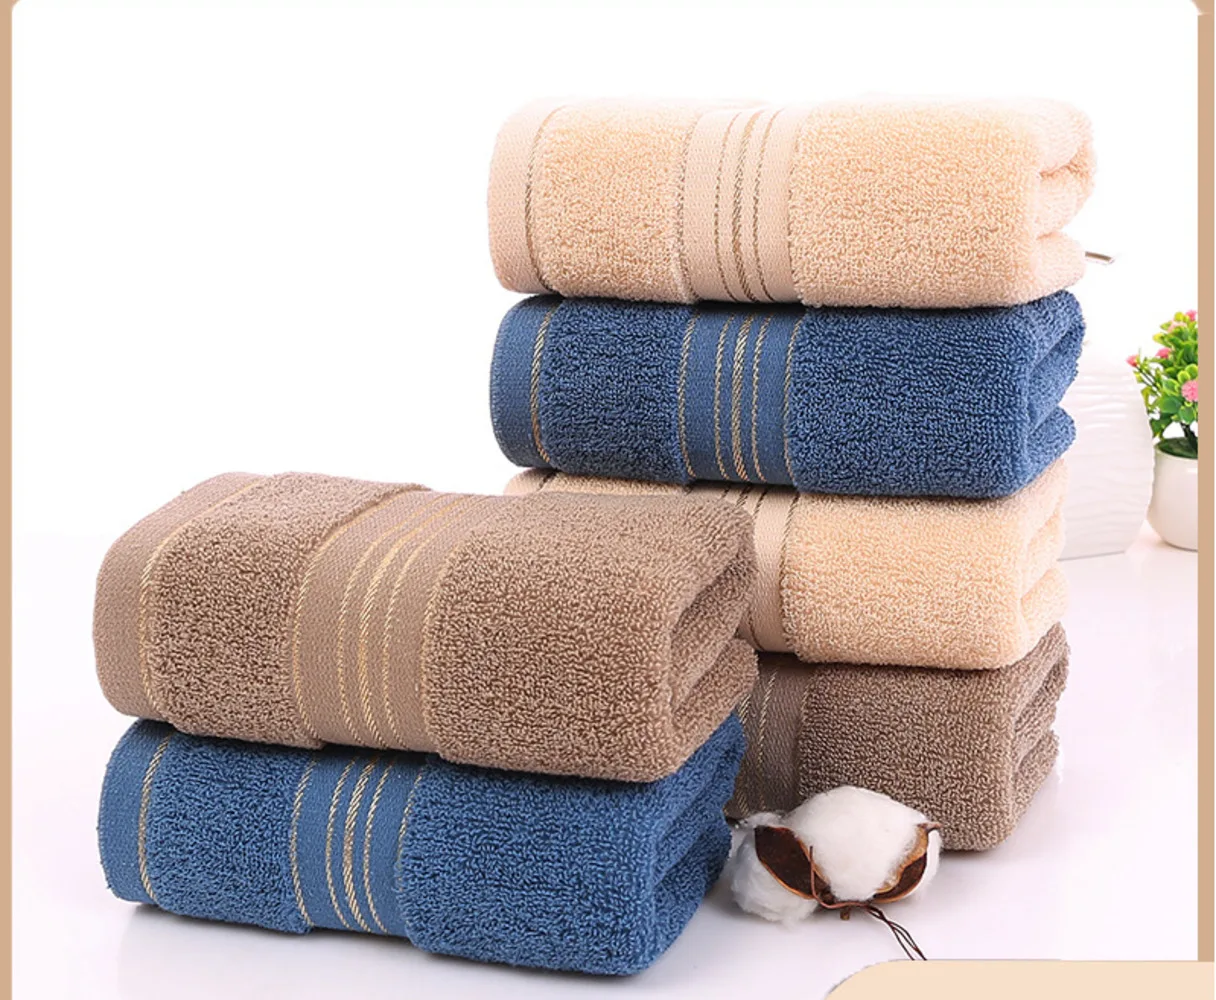 

Pure cotton towel absorbs water, does not shed hair, and does not fade. Household face wash towels are soft and absorbent. All